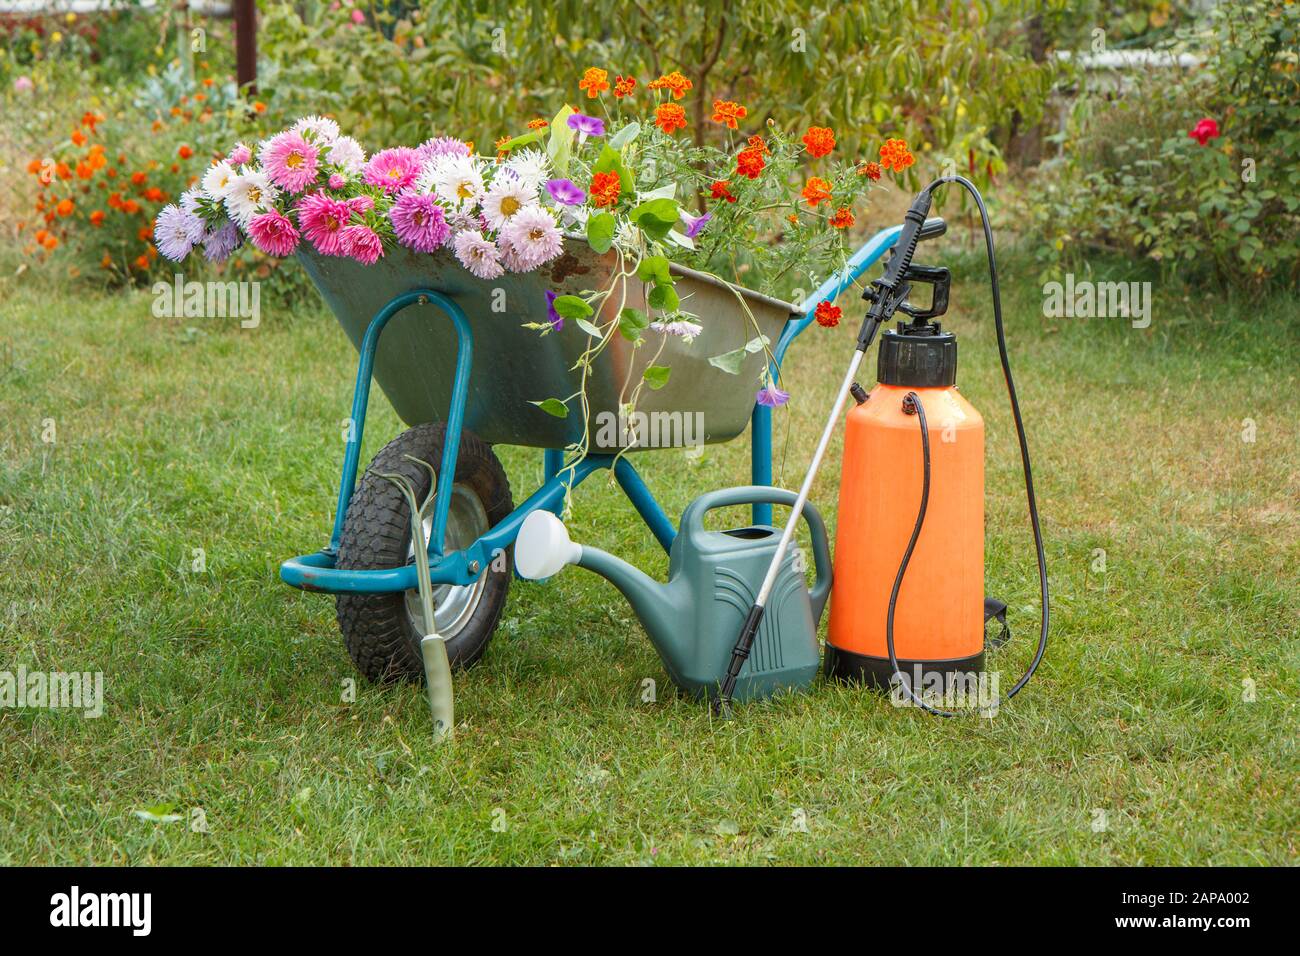 Morning after work in summer garden. Wheelbarrow with flowers, watering can and garden pressure sprayer on green grass. Stock Photo